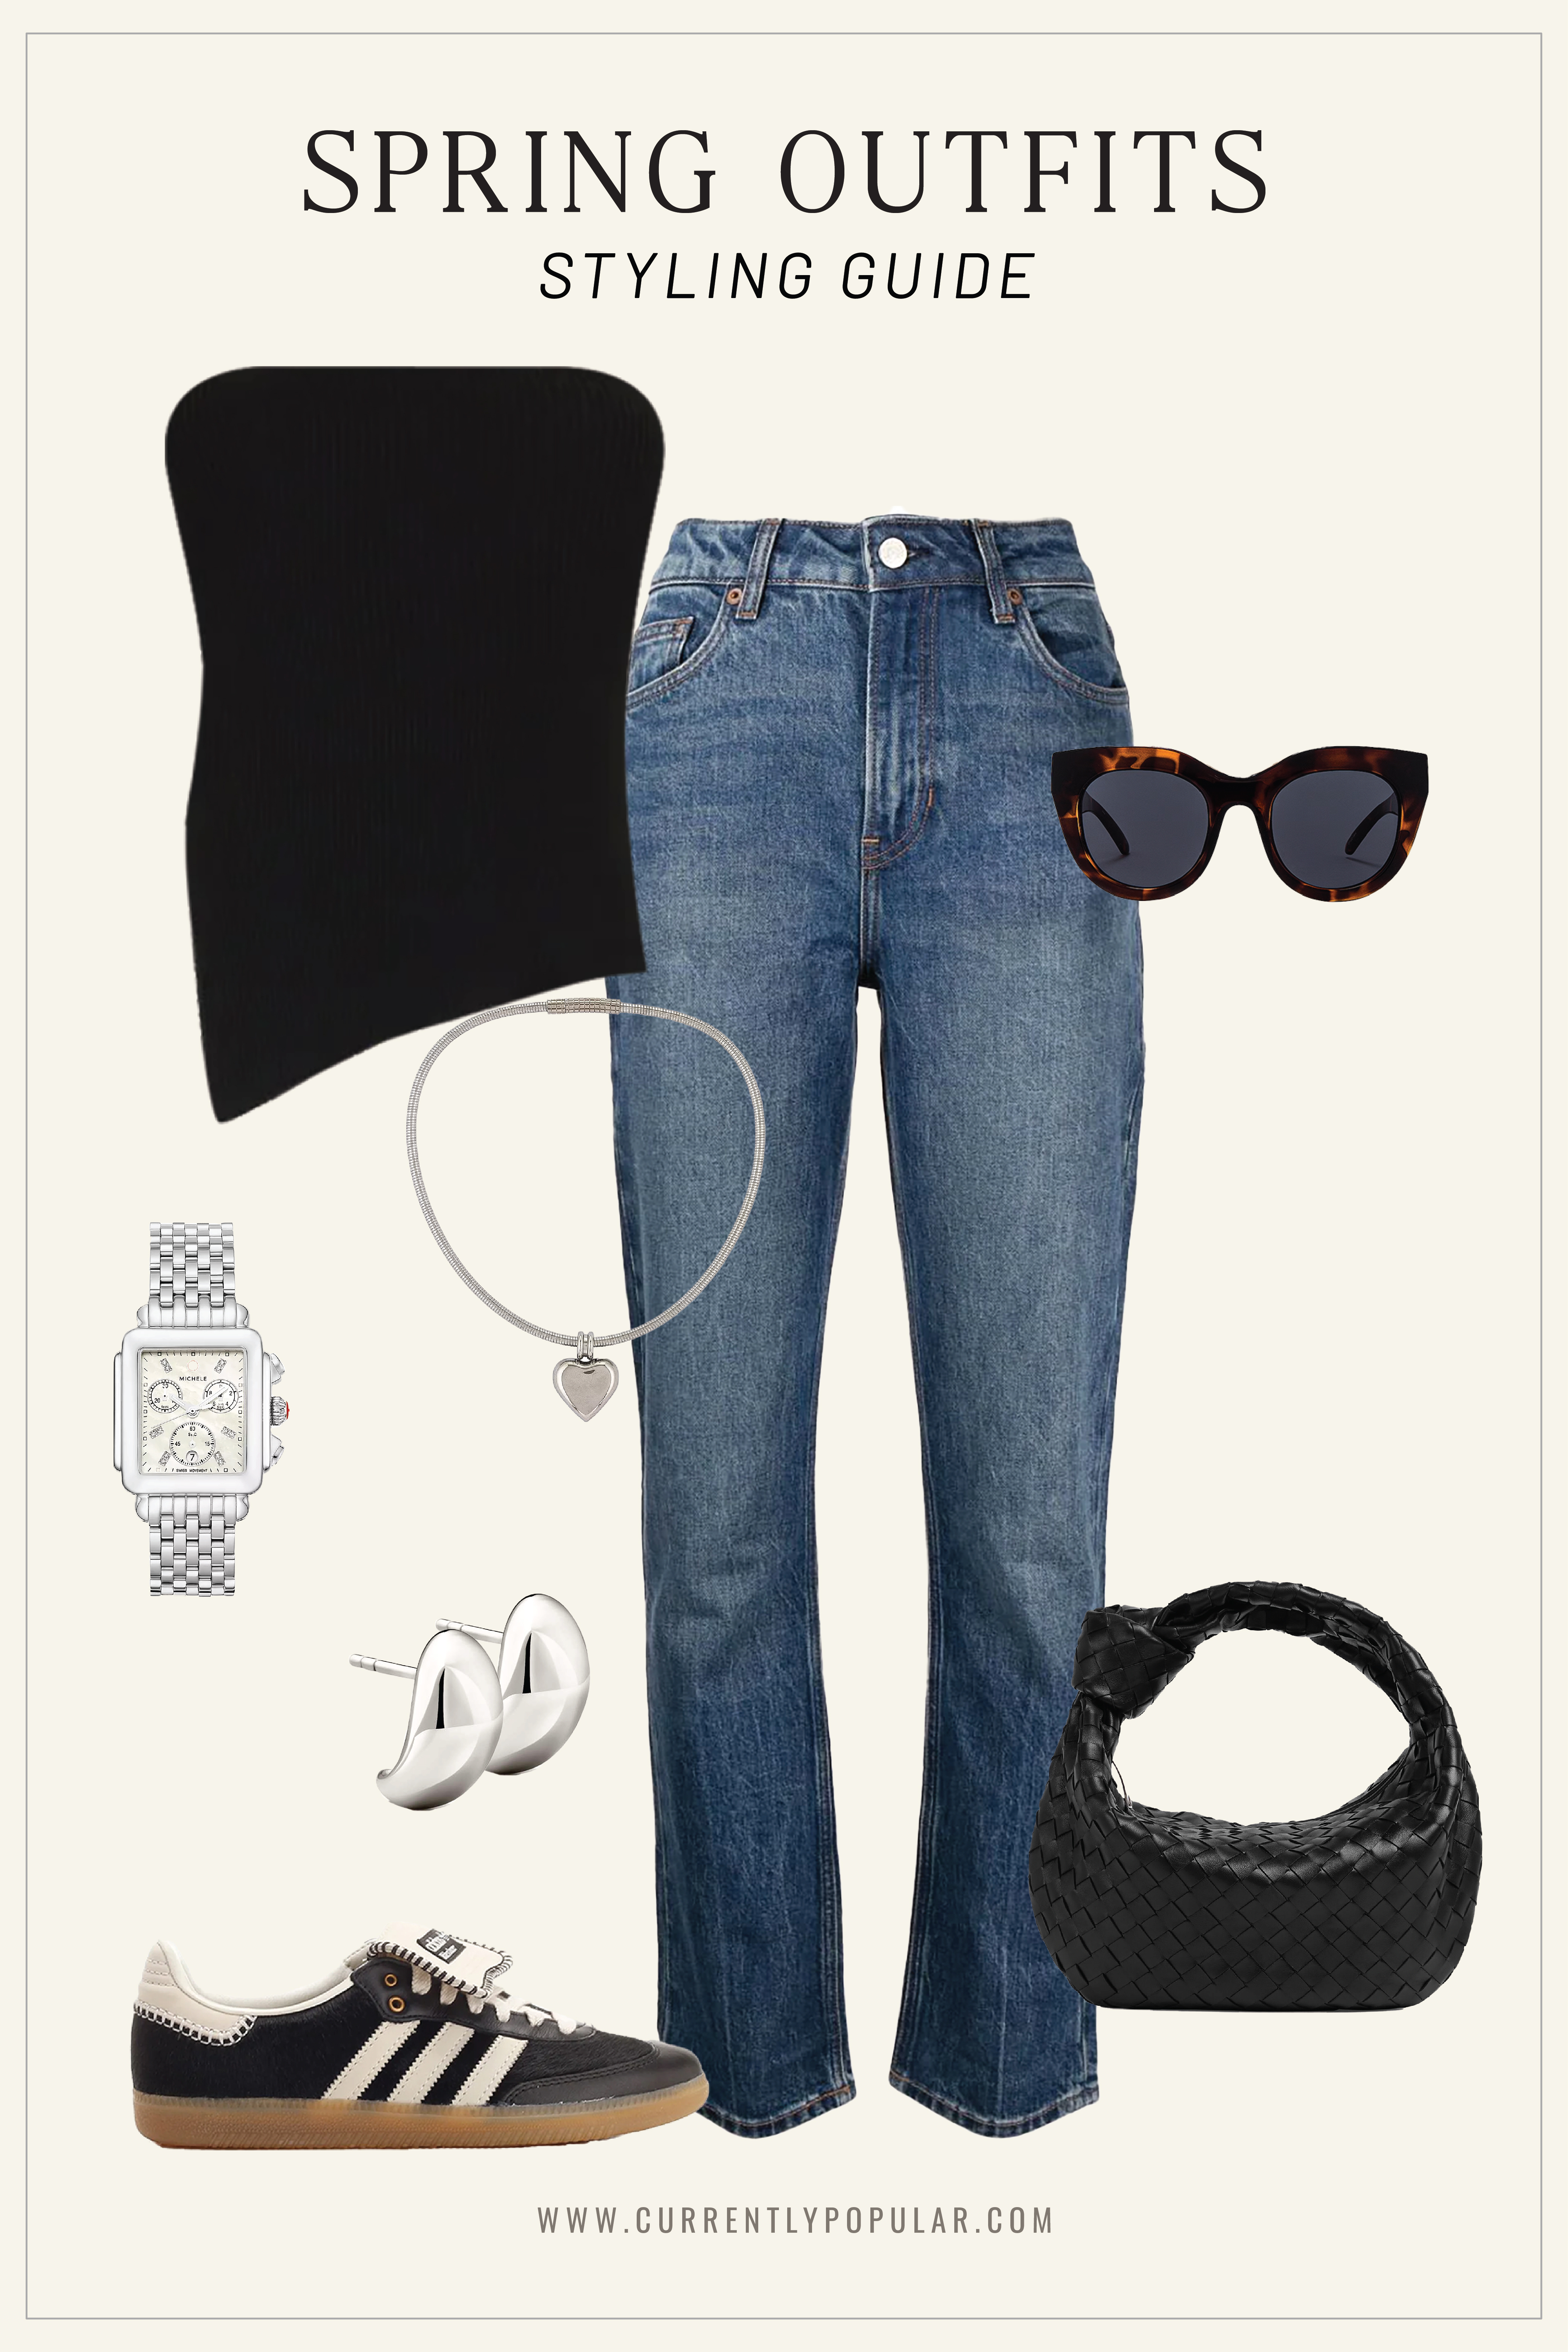 Casual Spring Outfit: Black Strapless Top, Blue Jeans, Adidas Samba Sneakers, Silver Metal Watch.